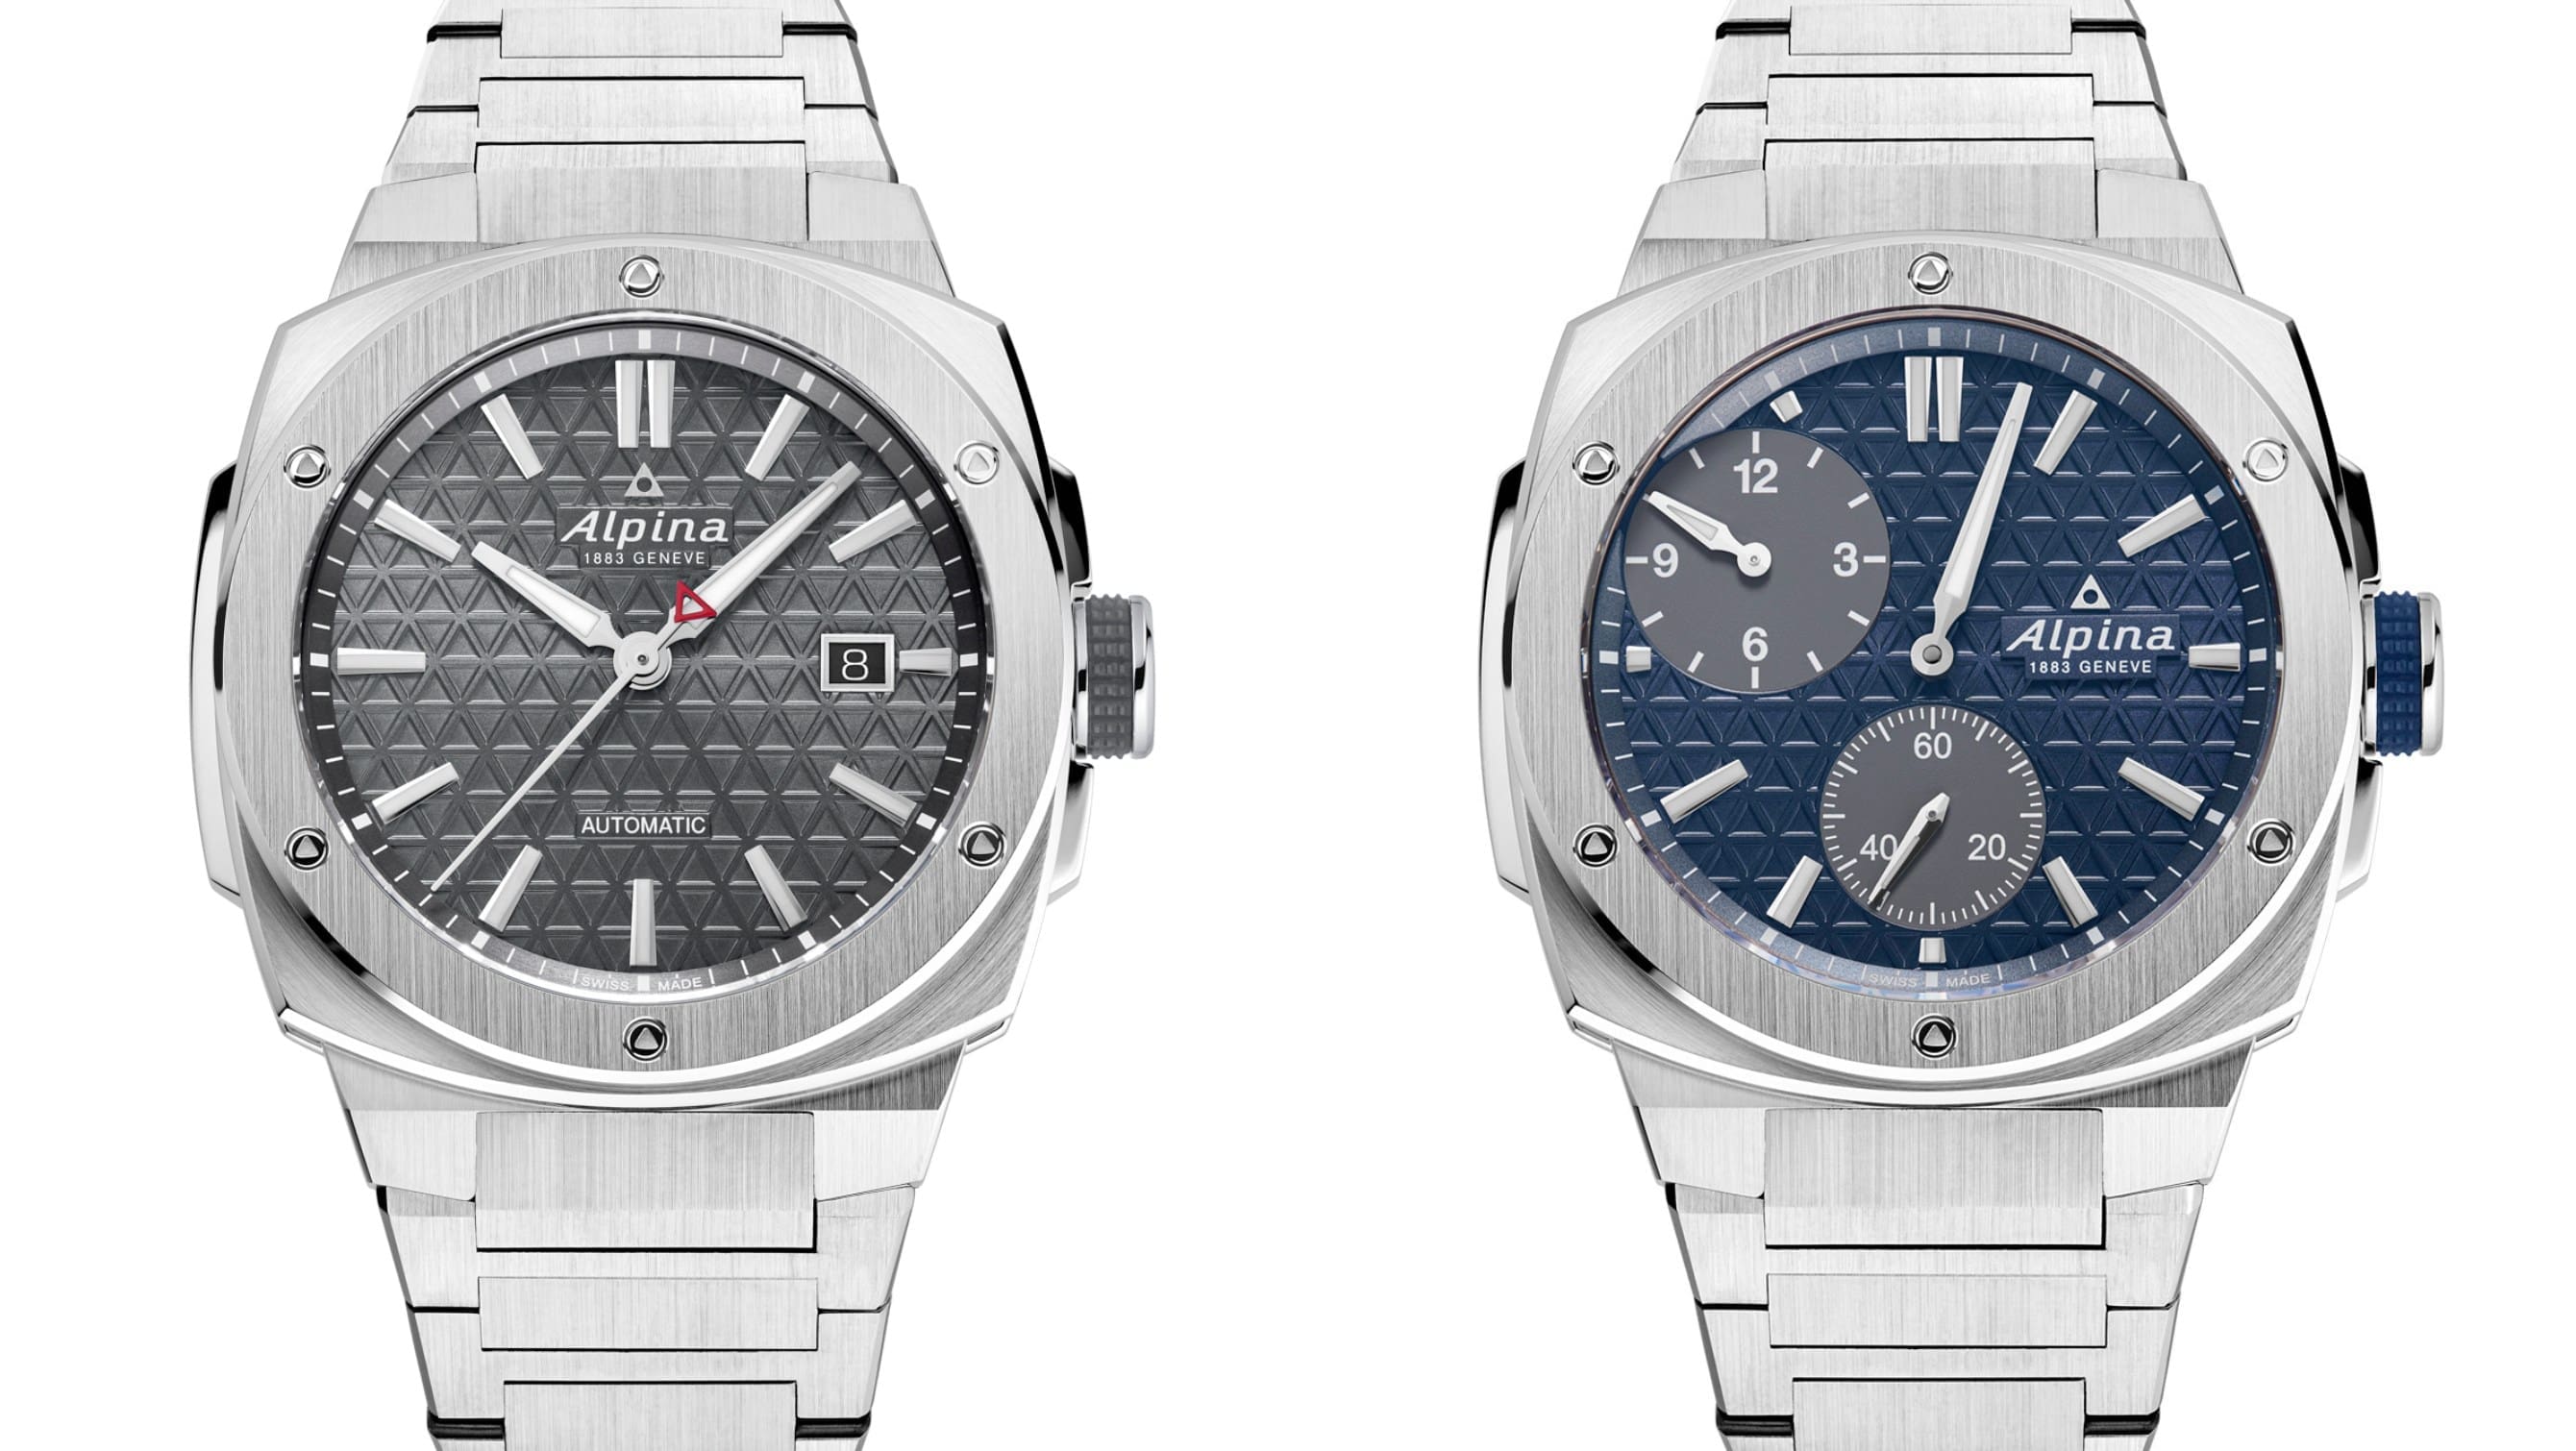 Alpina brings four new models to their Alpiner Extreme range